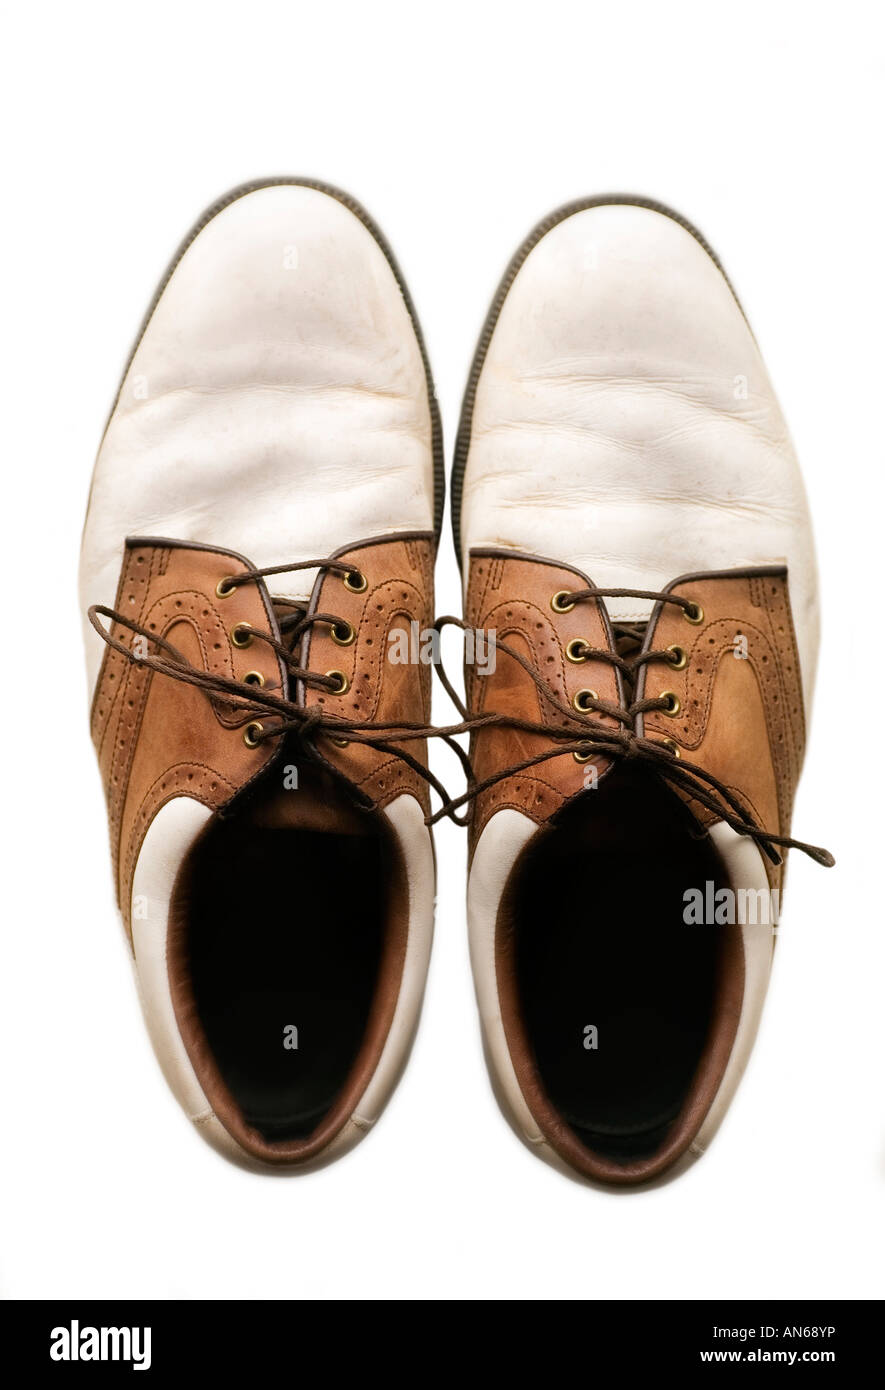 Pair of golf shoes Stock Photo